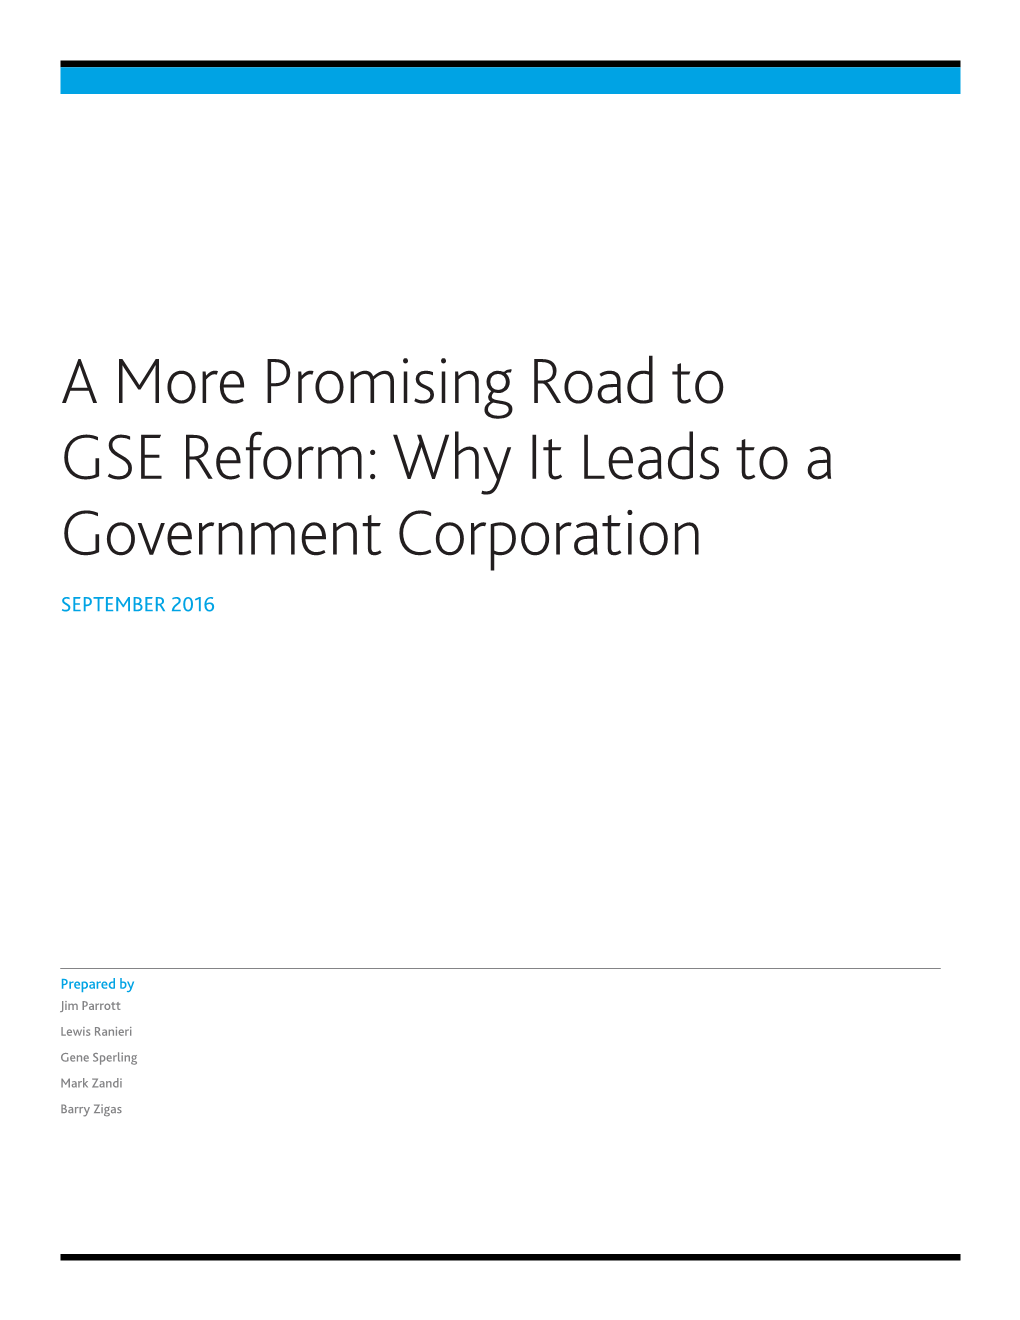 A More Promising Road to GSE Reform: Why It Leads to a Government Corporation